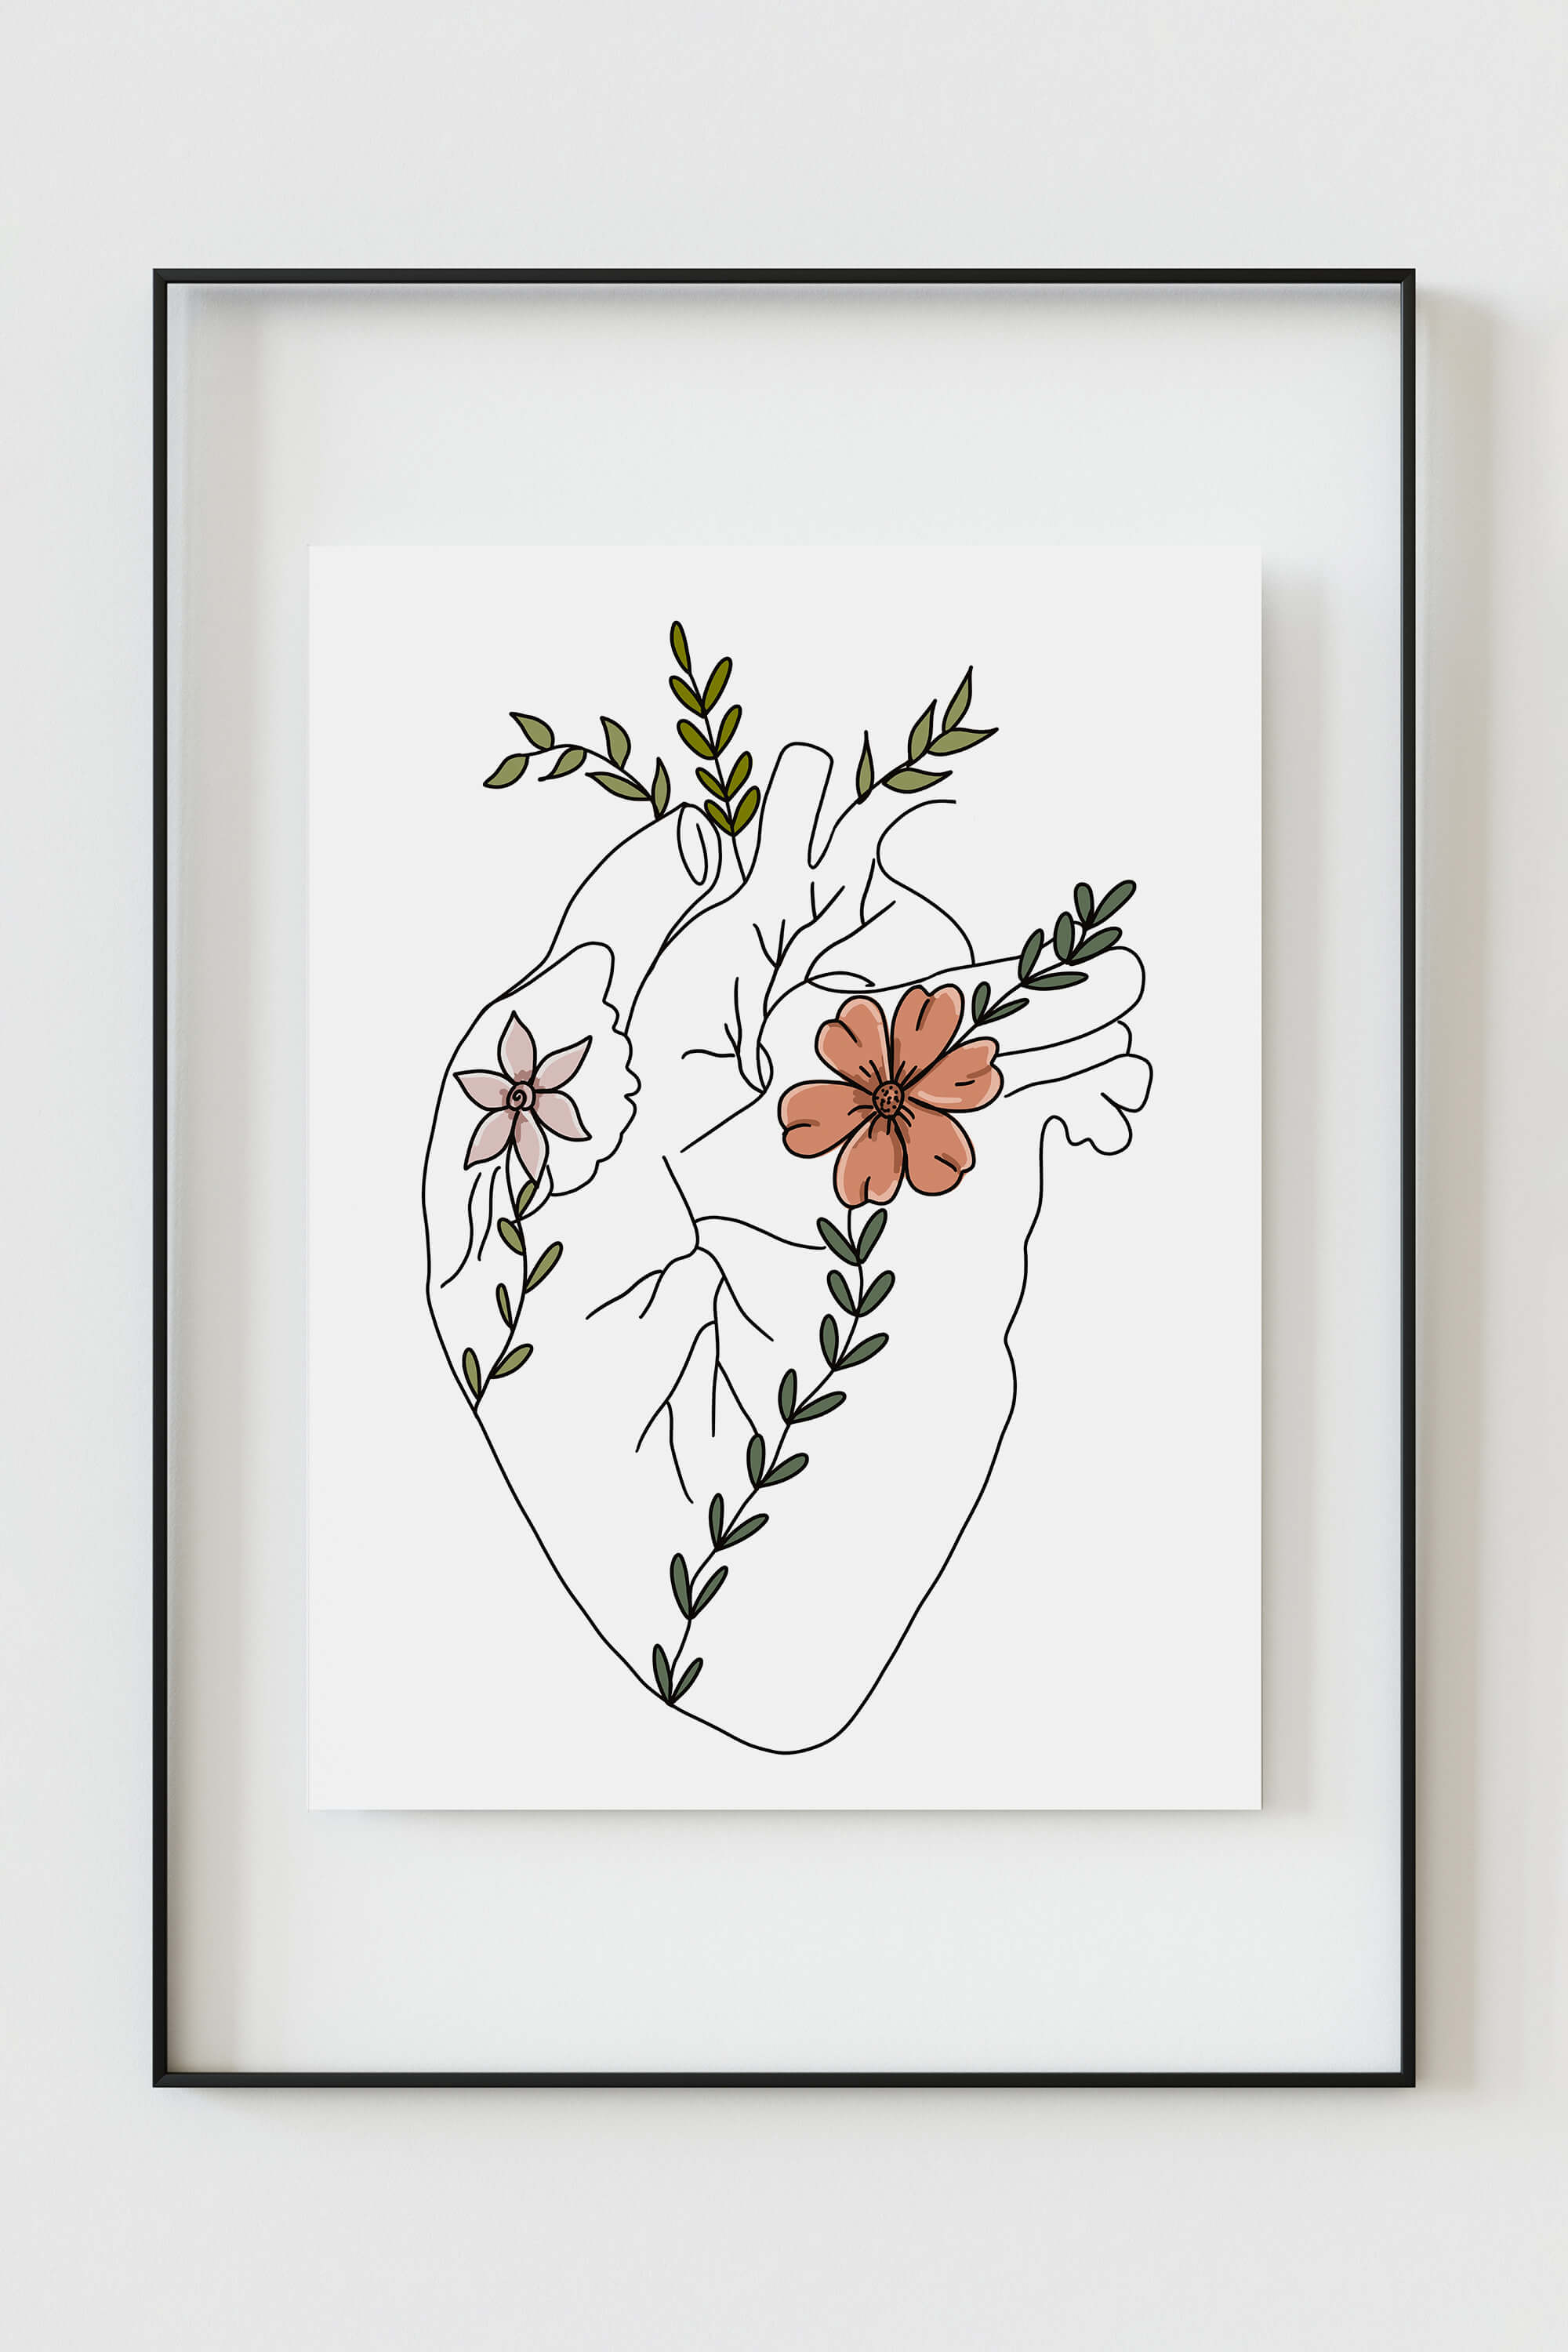 Heart art drawing, a unique and thoughtful graduation gift for medical students entering the healthcare field.